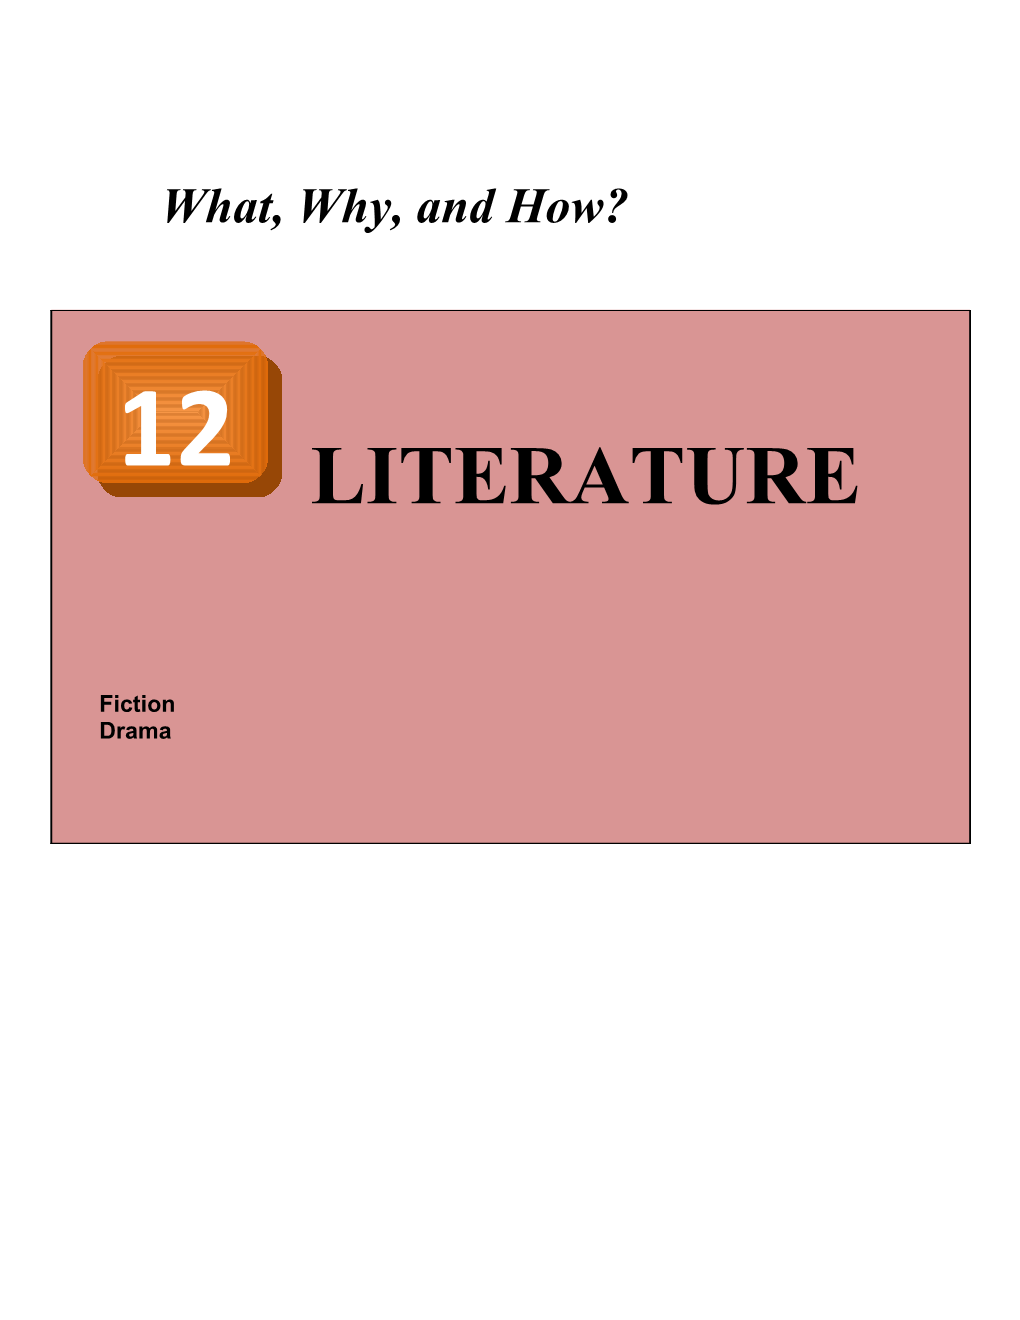 The Main Literary Forms Are Fiction, Drama & Poetry